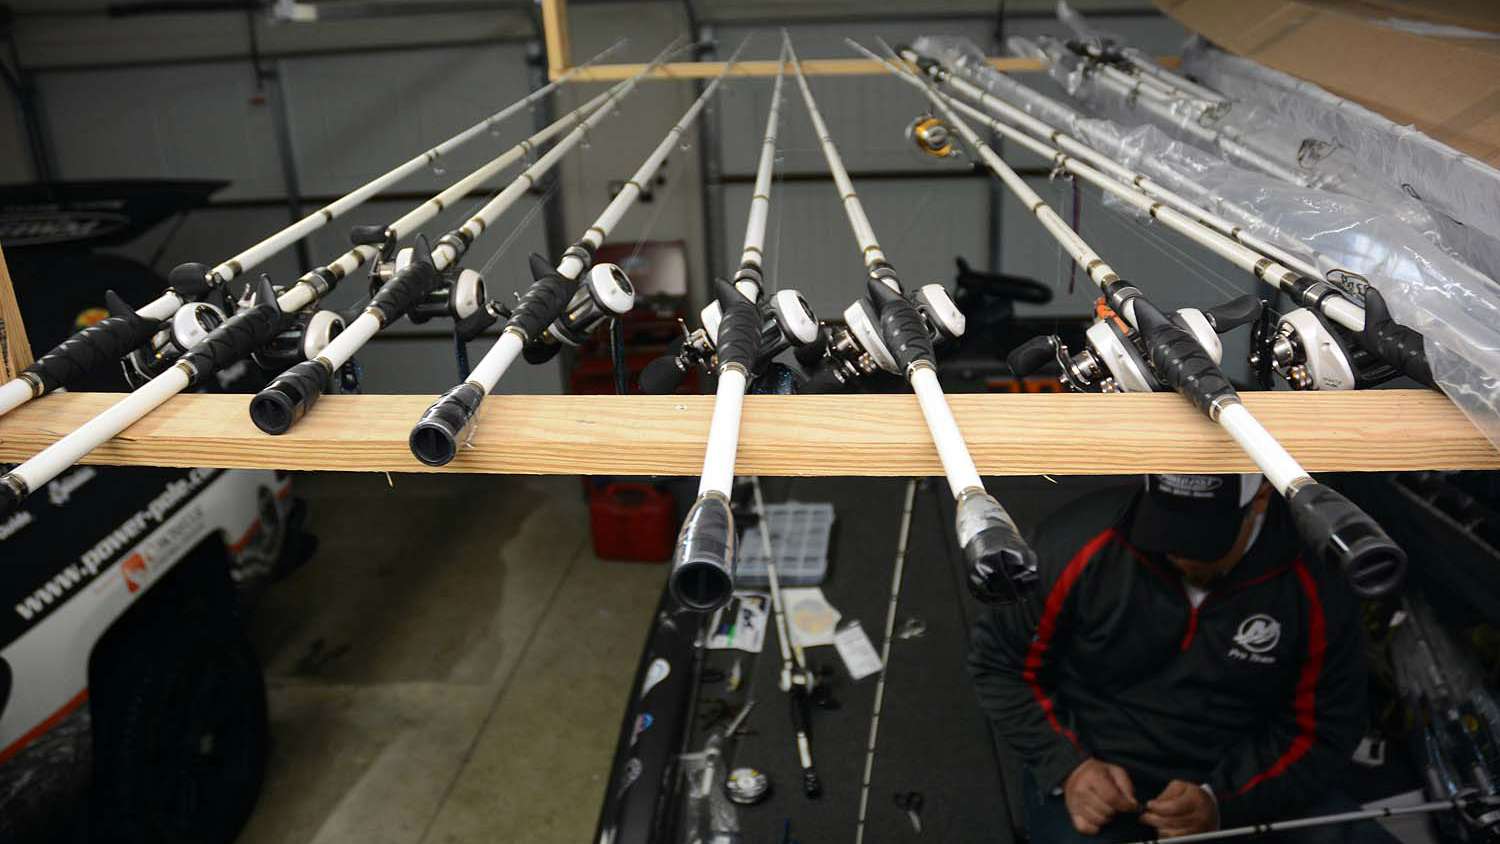 Above the boat is this homemade rod rack. Itâs a simple and functional design for temporarily storing rod-and-reel combos. Lane can easily see and then reach for what he needs to load in the boat. 